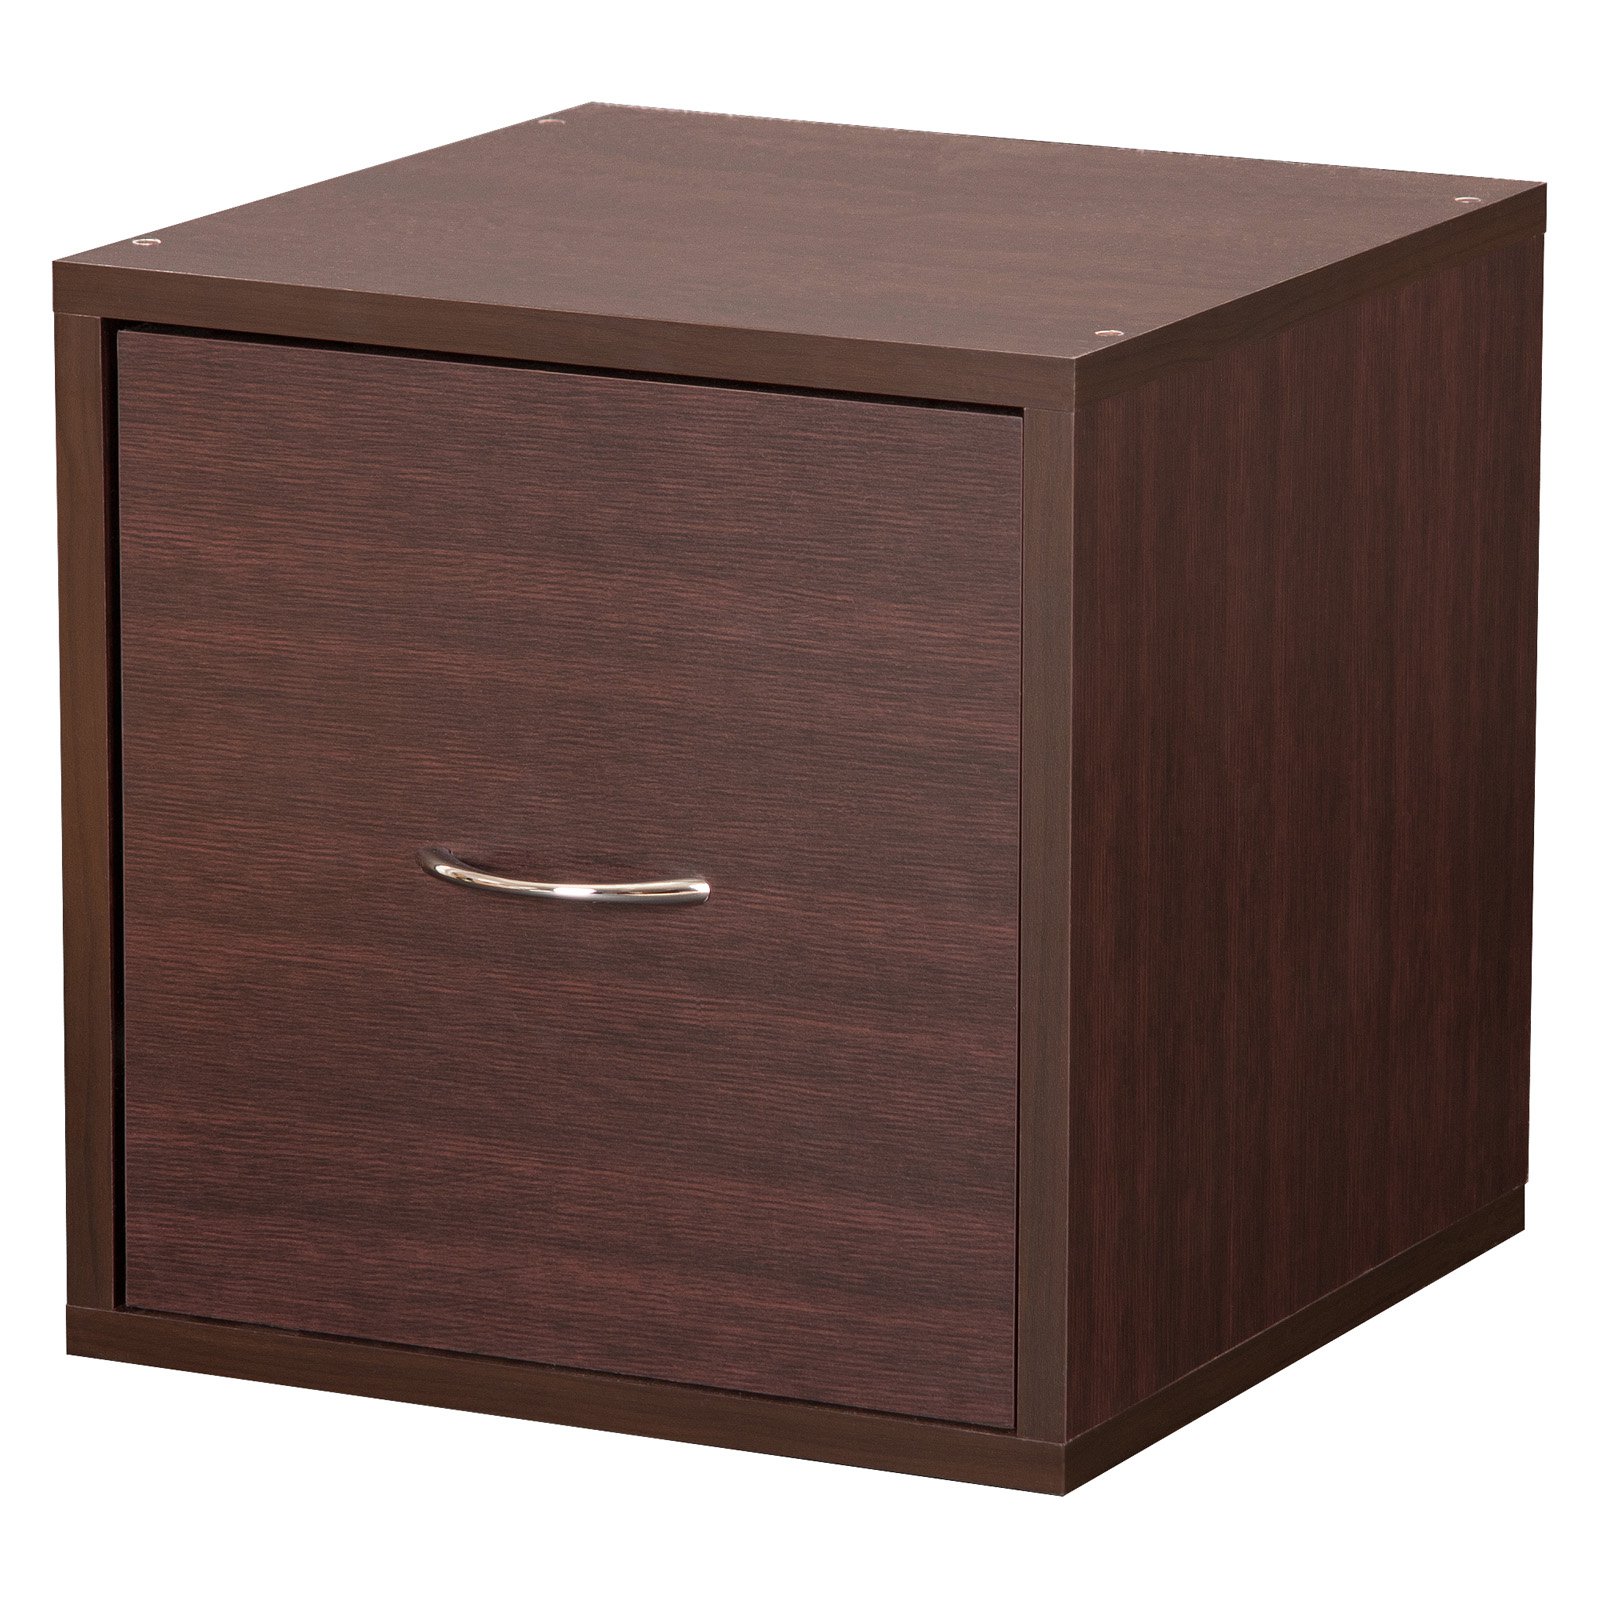 Foremost File Cabinet, 1-Drawer - image 1 of 3